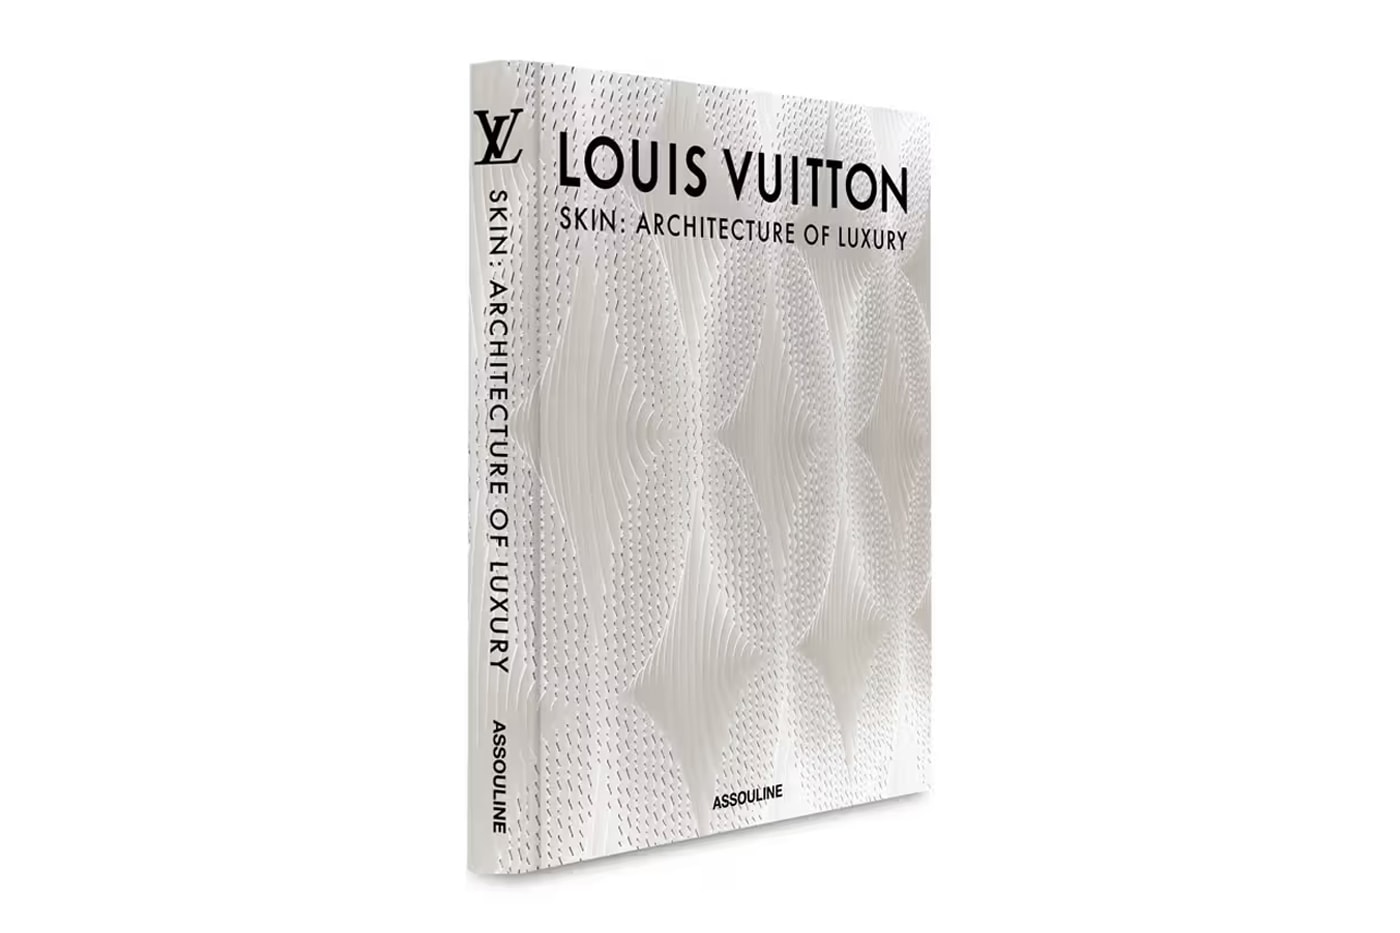 A New Book Celebrates the Architecture of Louis Vuitton Stores Around the  World, From Istanbul to Seoul